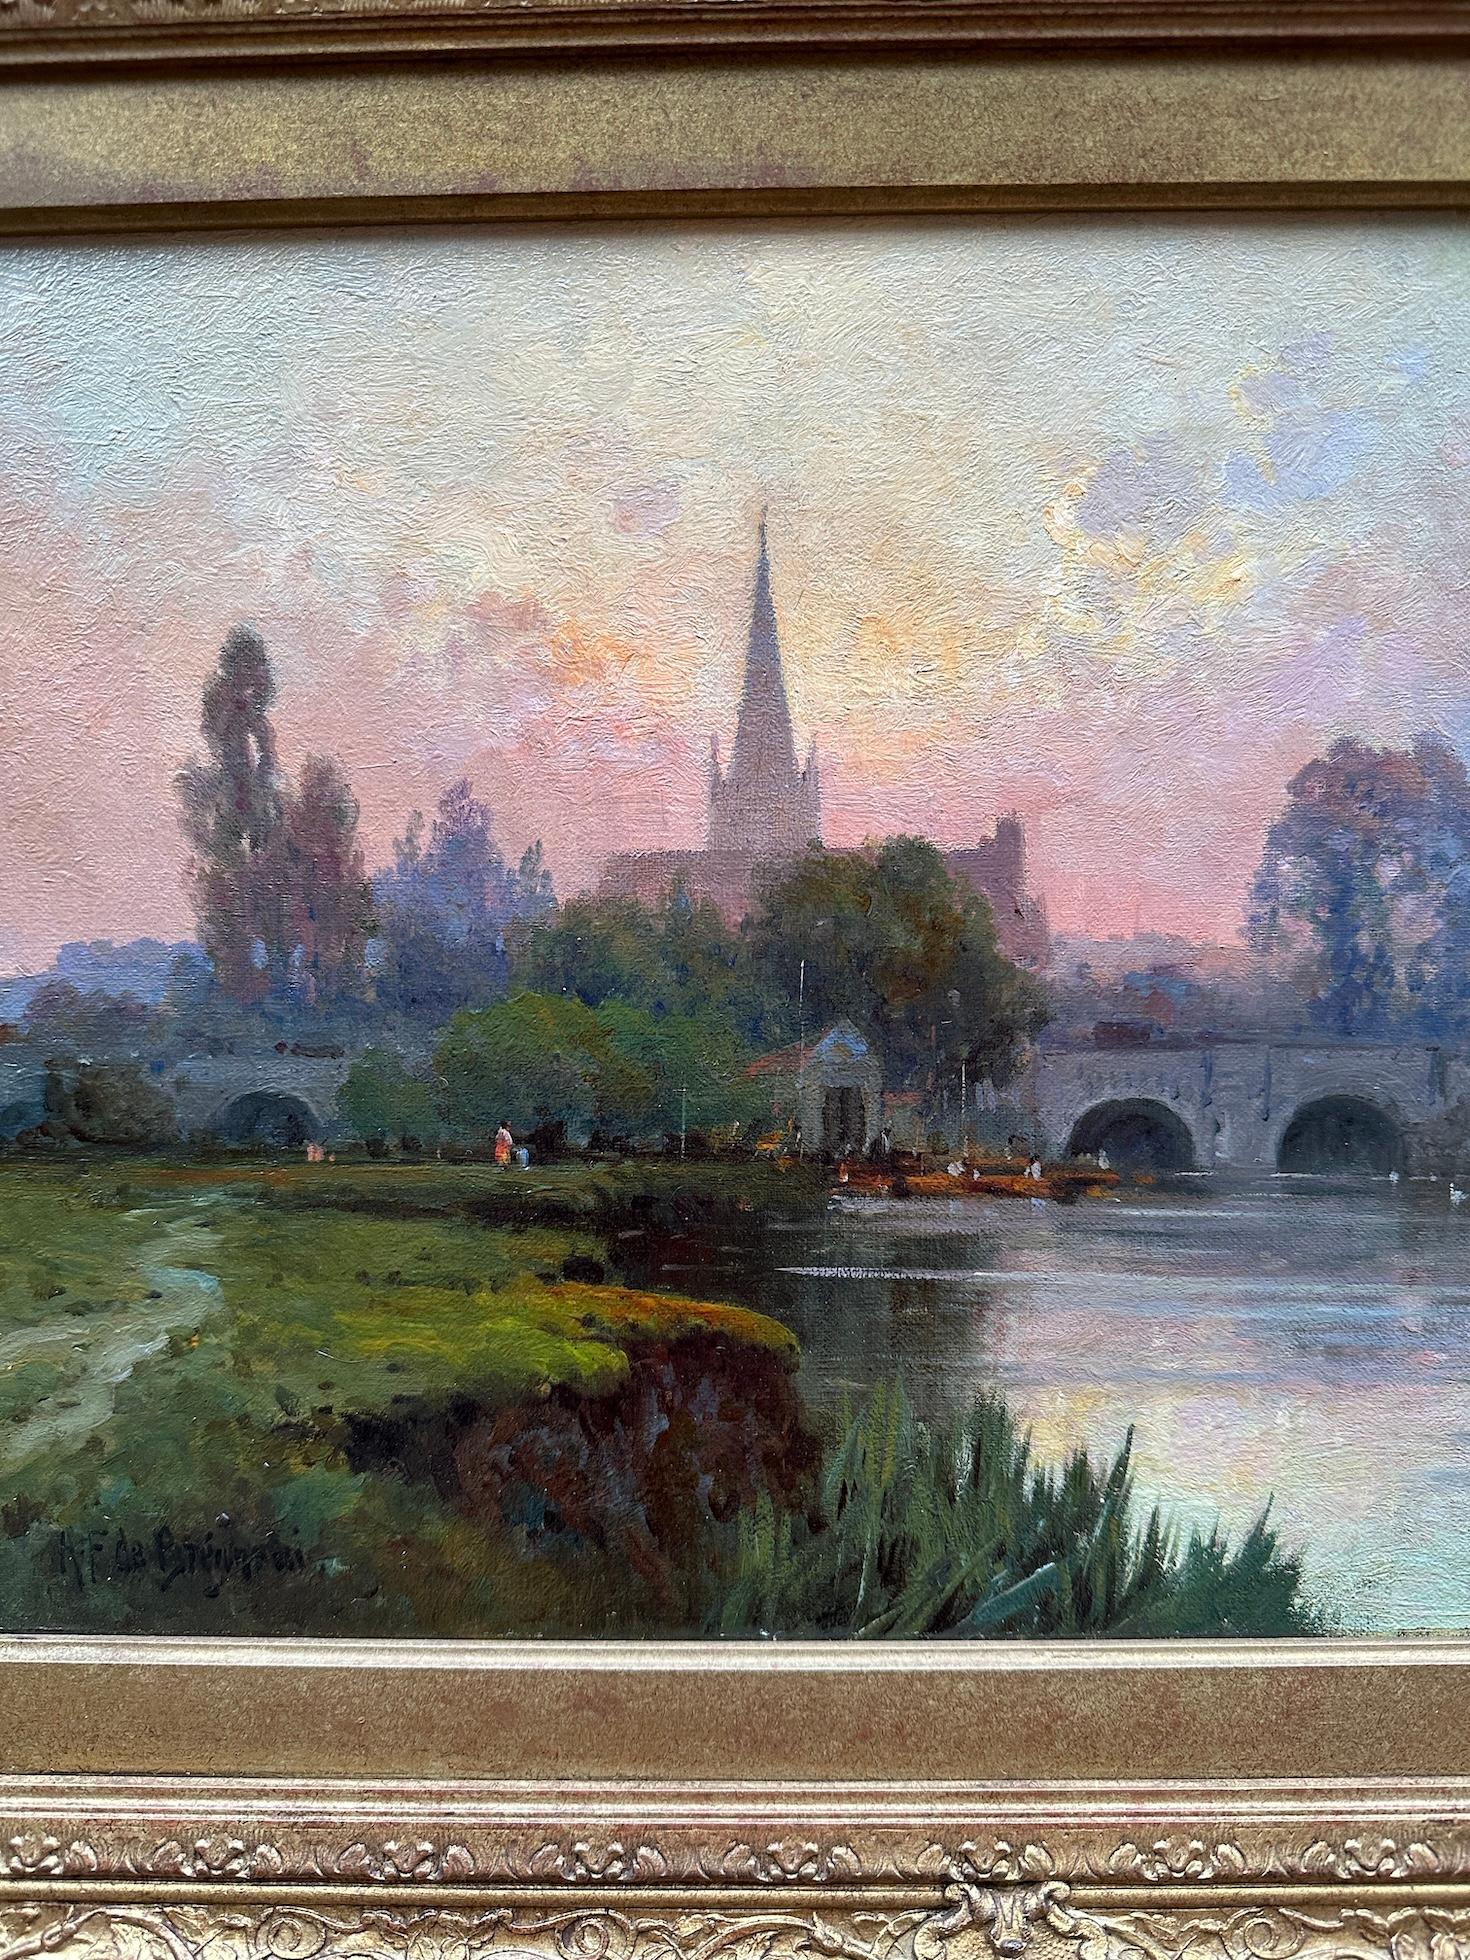 English River landscape, with Church and River at Sunset, Abingdon on the Thames - Painting by Alfred de Breanski Jnr.